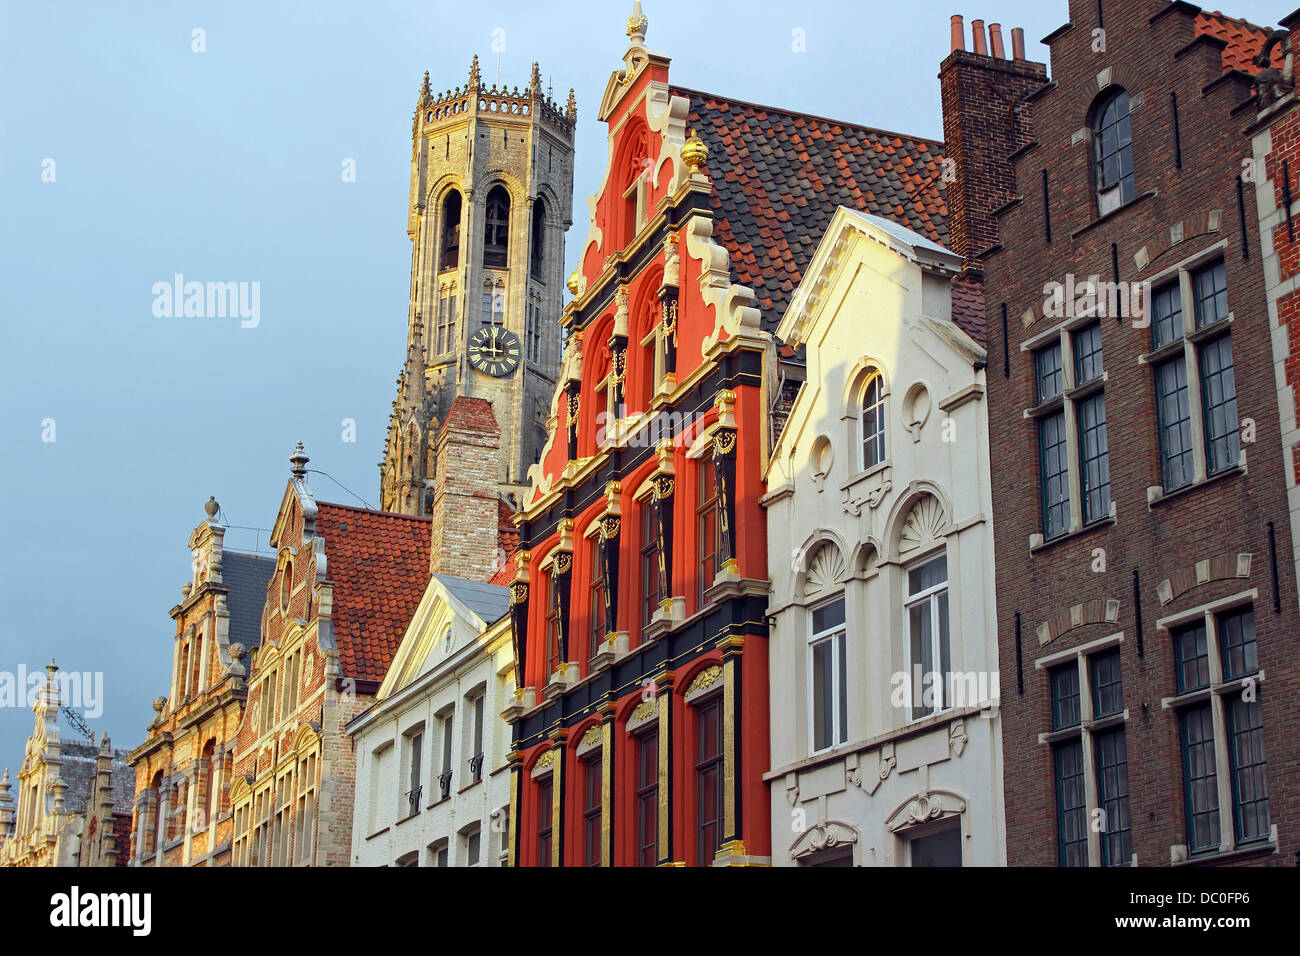 Bruges Belgium Flanders Europe Brugge gable roof guild houses in shopping district with Bell Tower Stock Photo